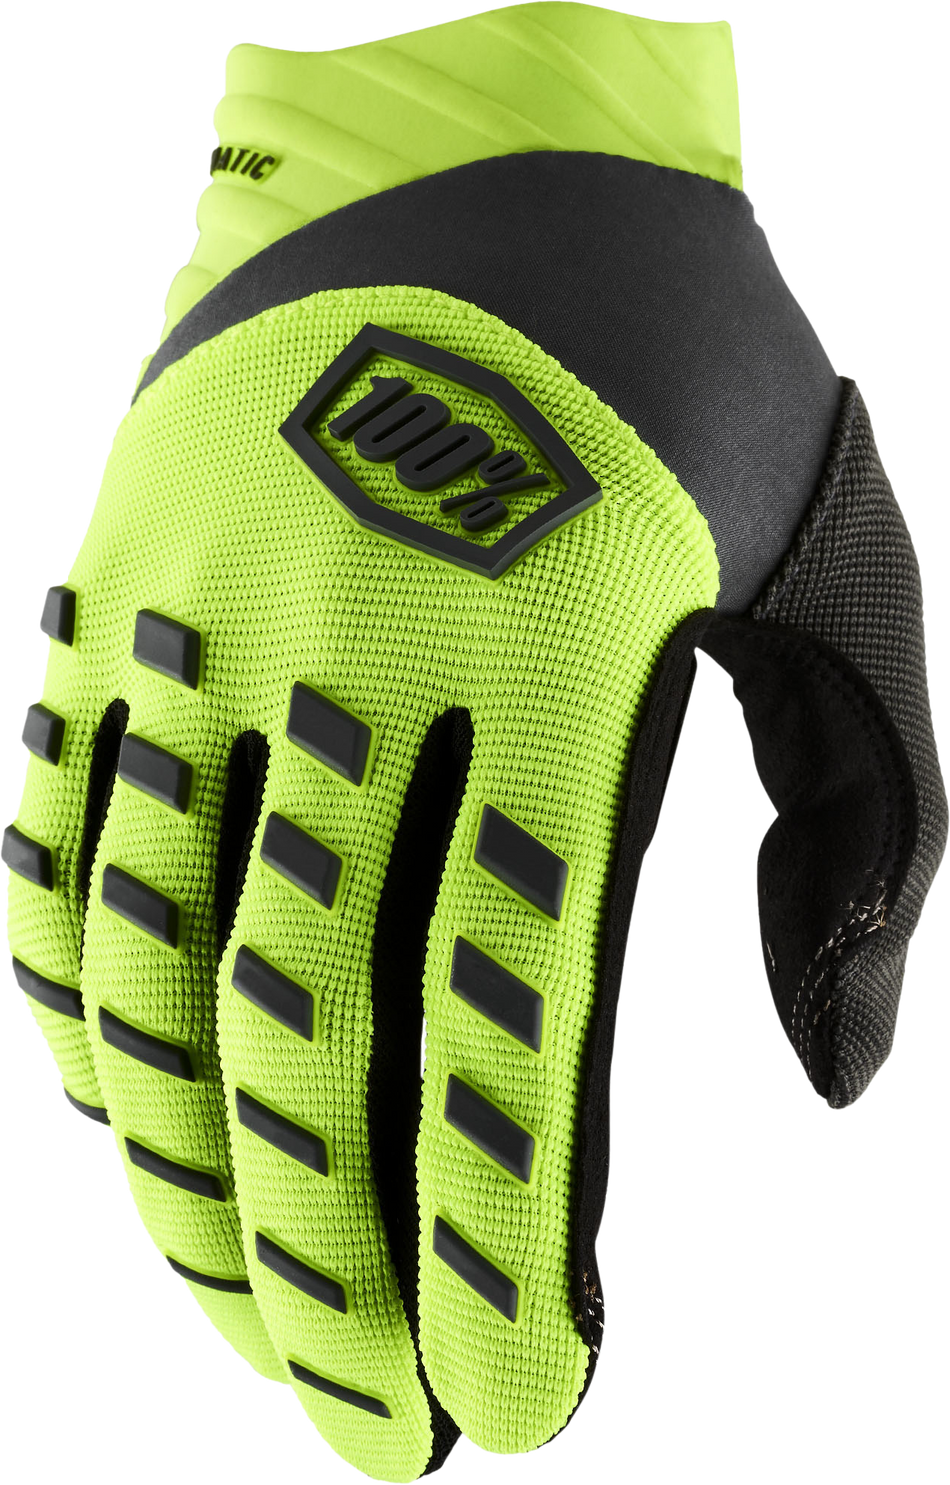 100% Airmatic Gloves Fluo Yellow/Black Xl 10000-00013